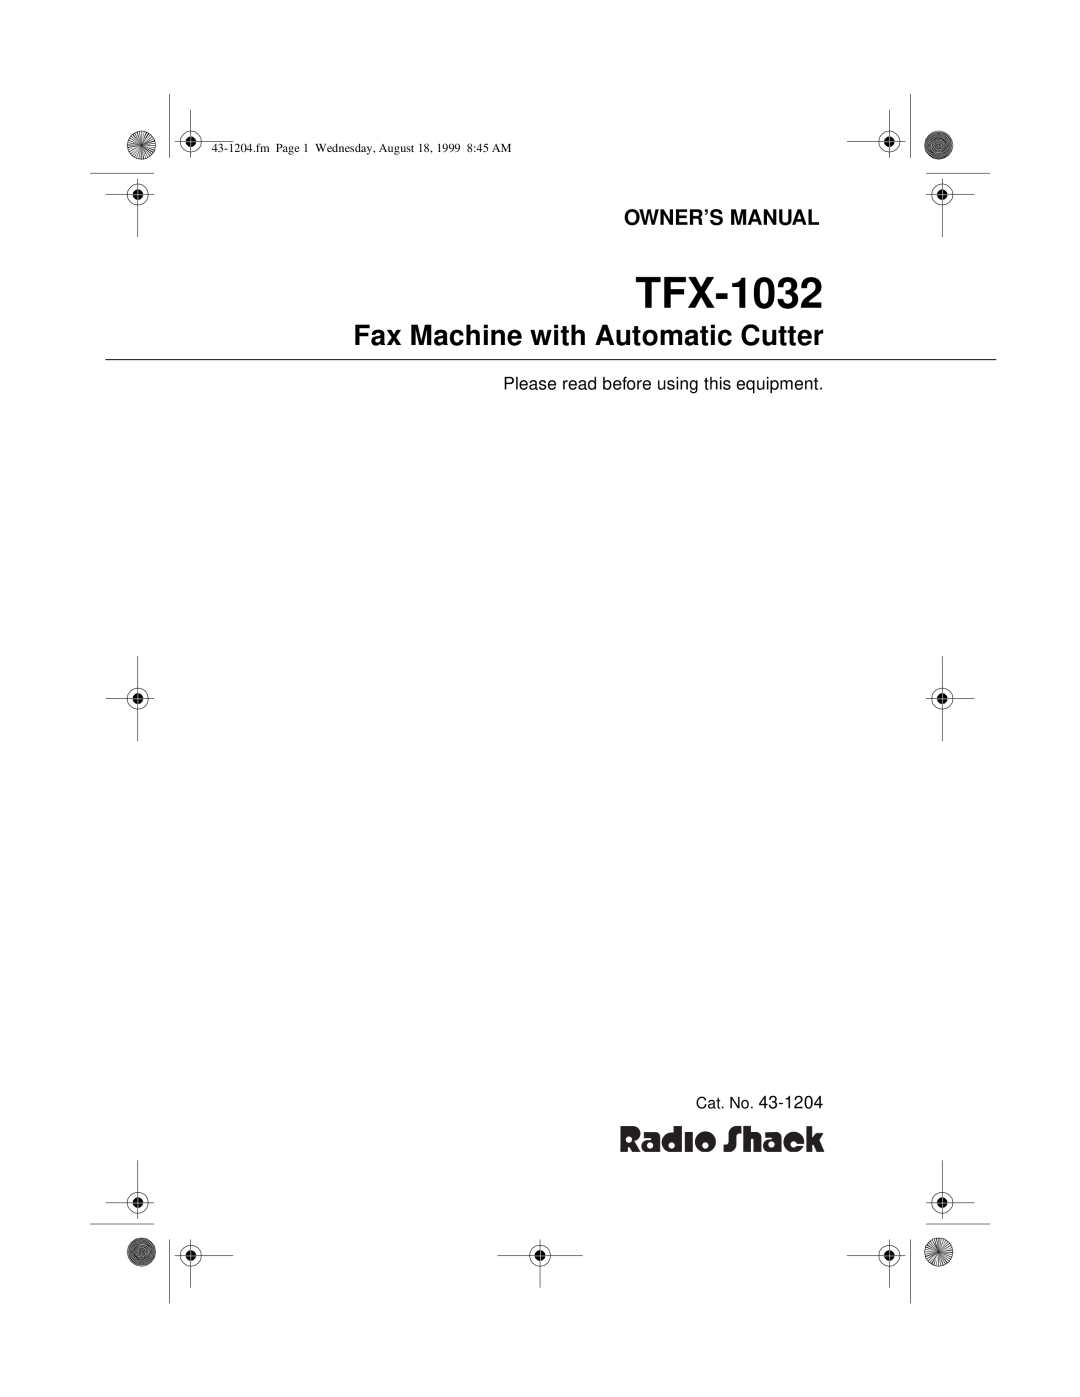 Radio Shack 43-1204 owner manual Fax Machine with Automatic Cutter, TFX-1032, fm Page 1 Wednesday, August 18, 1999 845 AM 